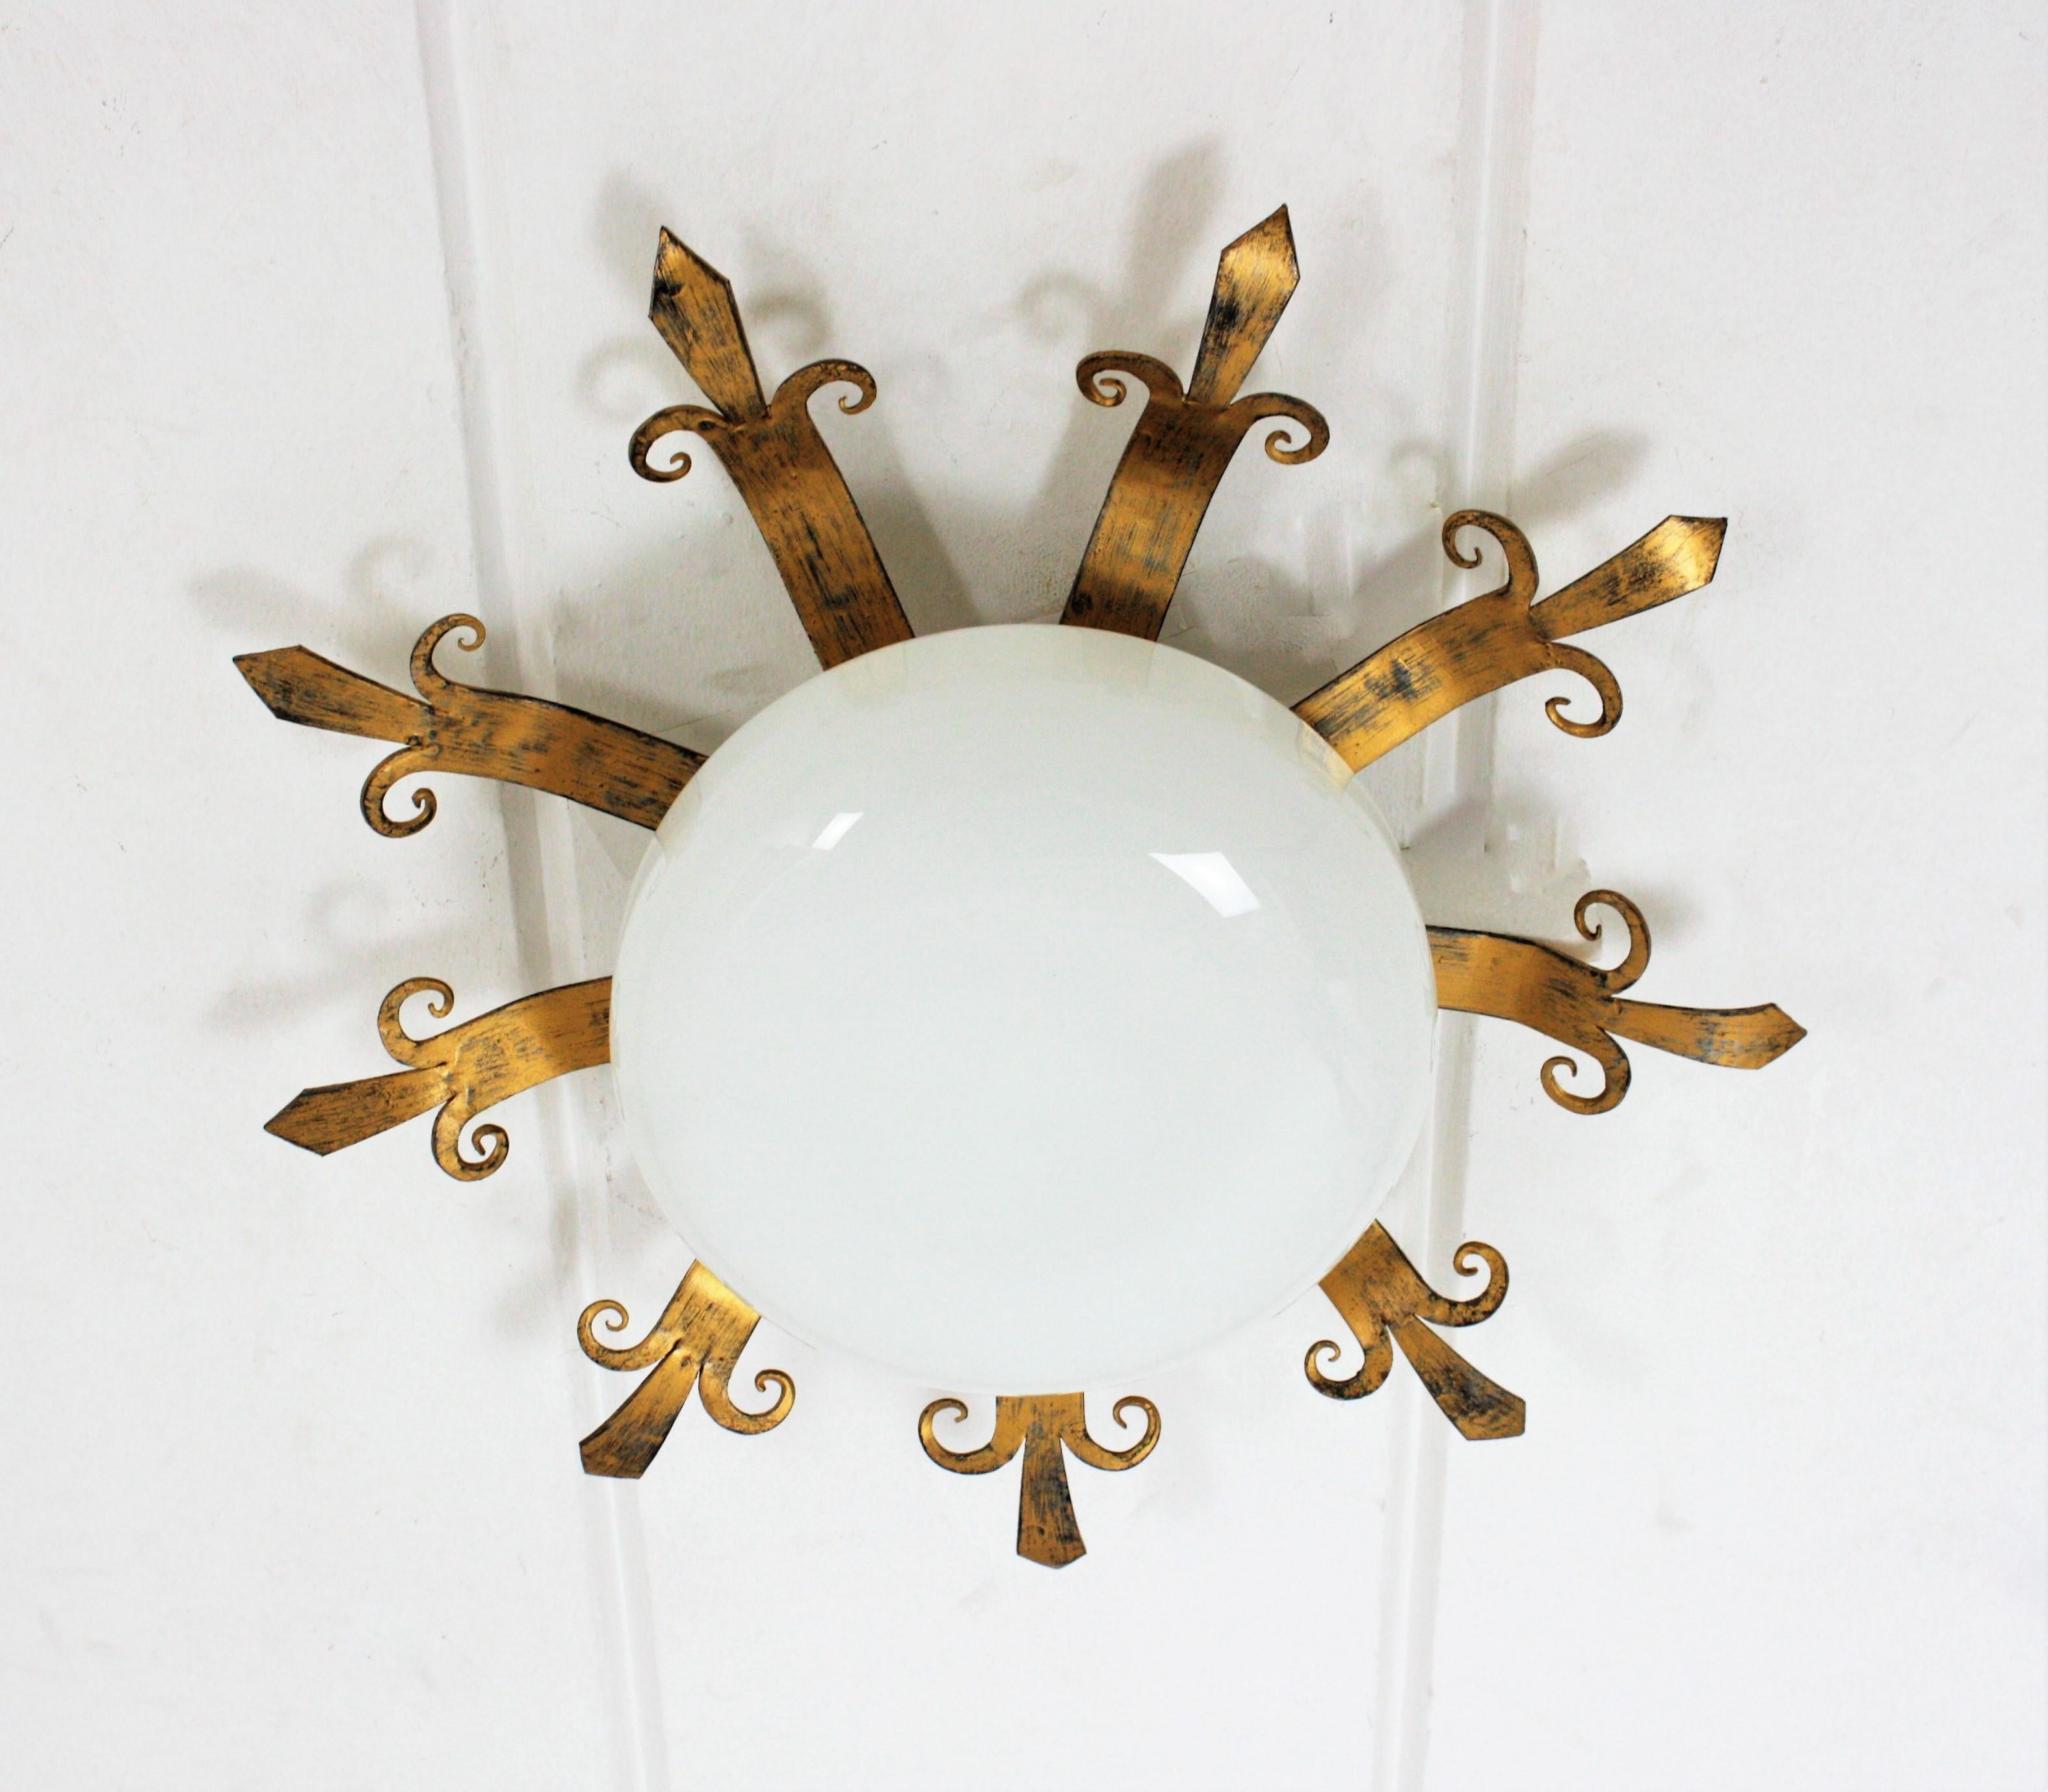 Eye-catching French sunburst flush mount in gilt metal and milk glass, 1950s
This Mid-Century sunburst starburst light fixture features a patinated gilt metal structure with a semi-spherical opaline glass shade.
It has a beautiful design with rays